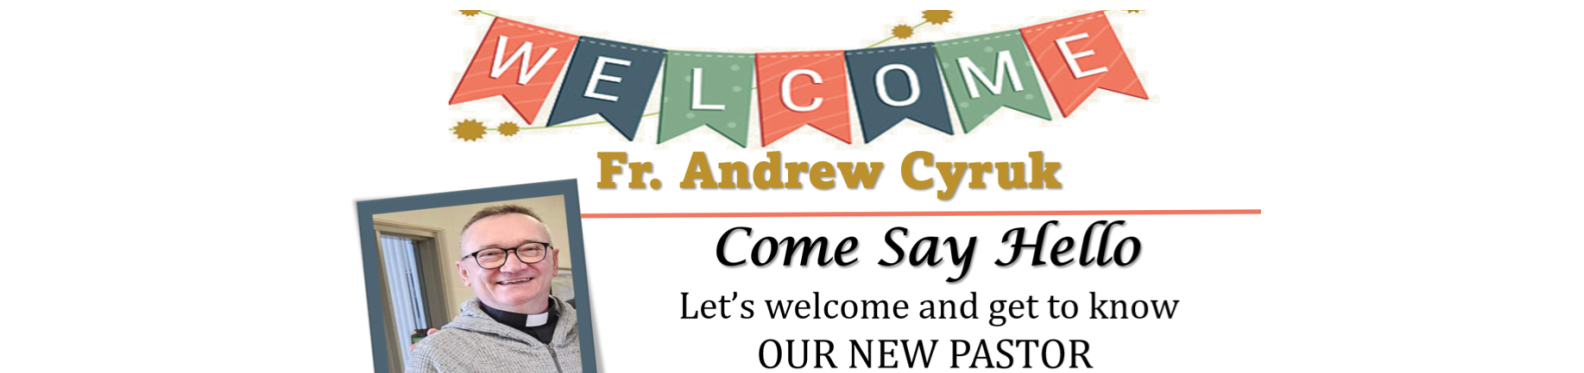 Welcome Fr. Andrew